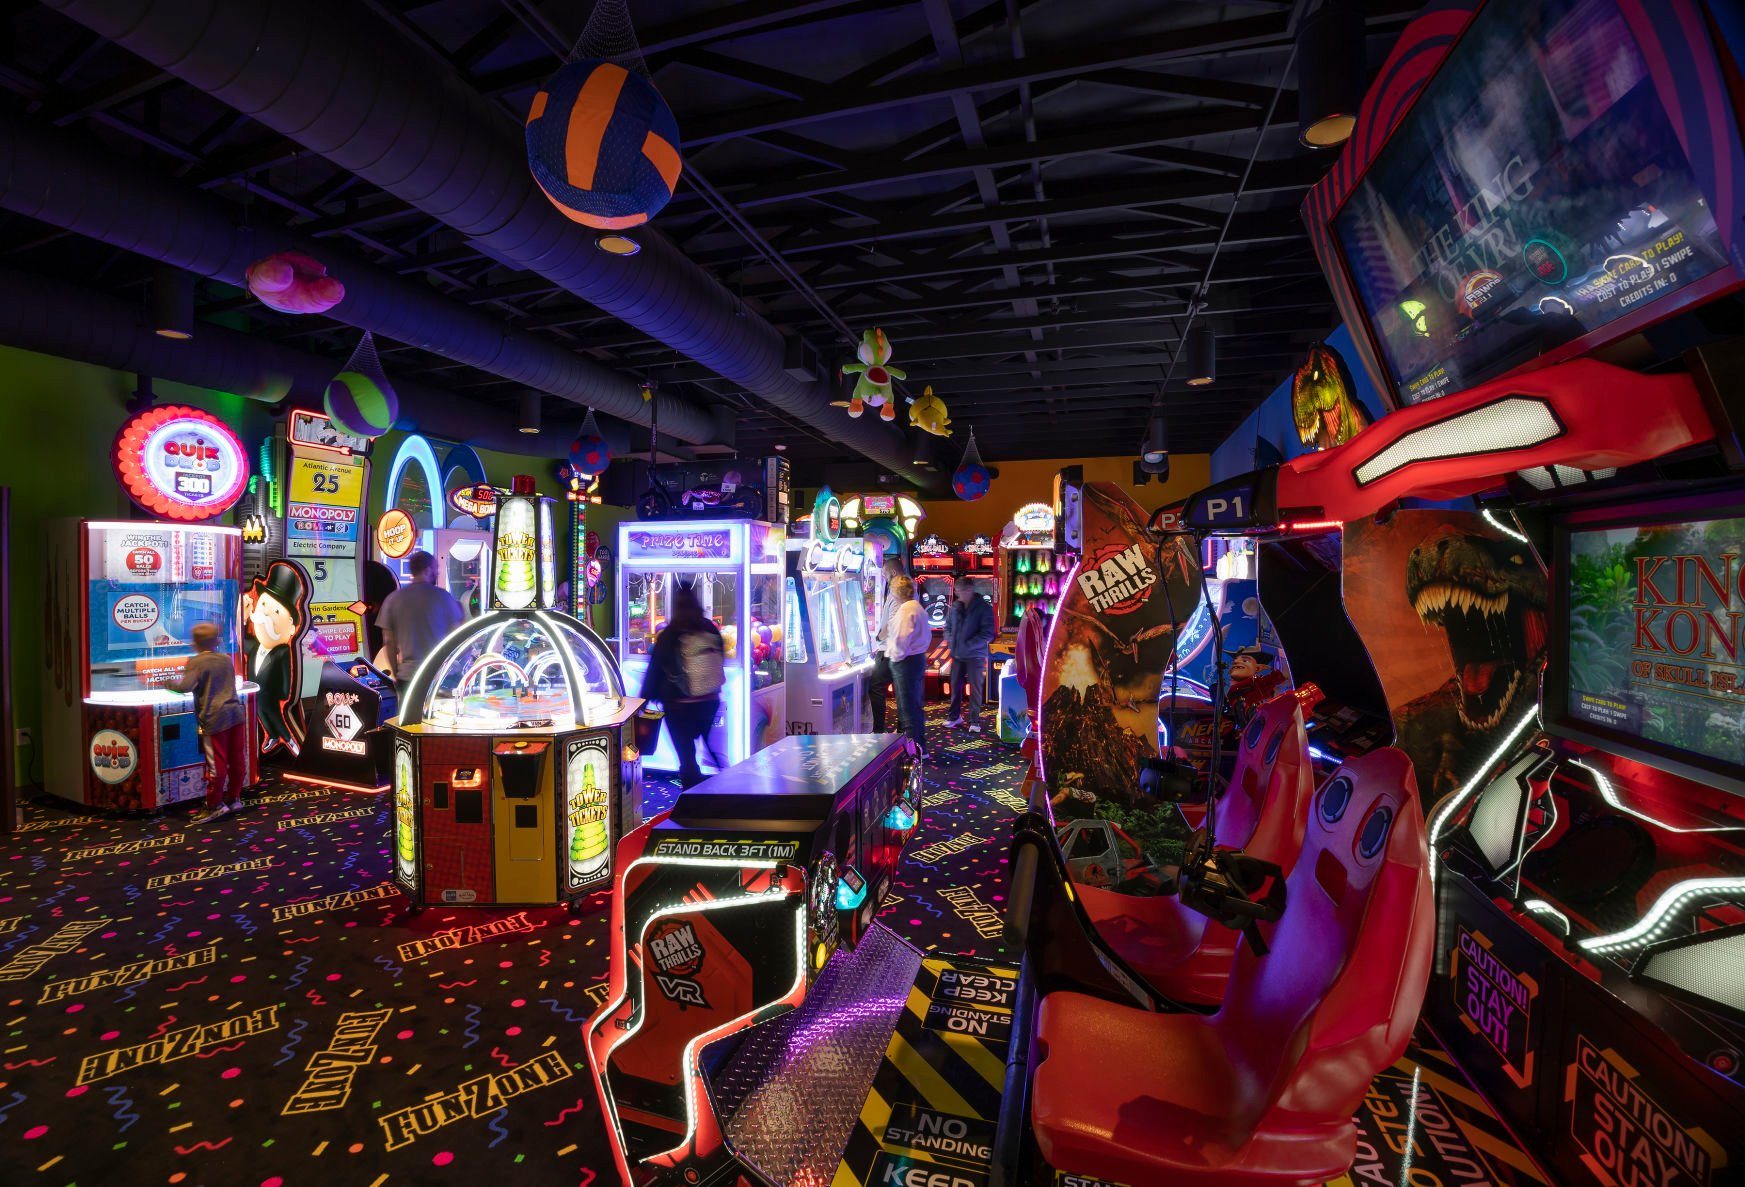 Customers enjoy the arcade games in the new FunZone at Pizza Ranch in Dubuque on Thursday, Feb. 10, 2022.    PHOTO CREDIT: Stephen Gassman